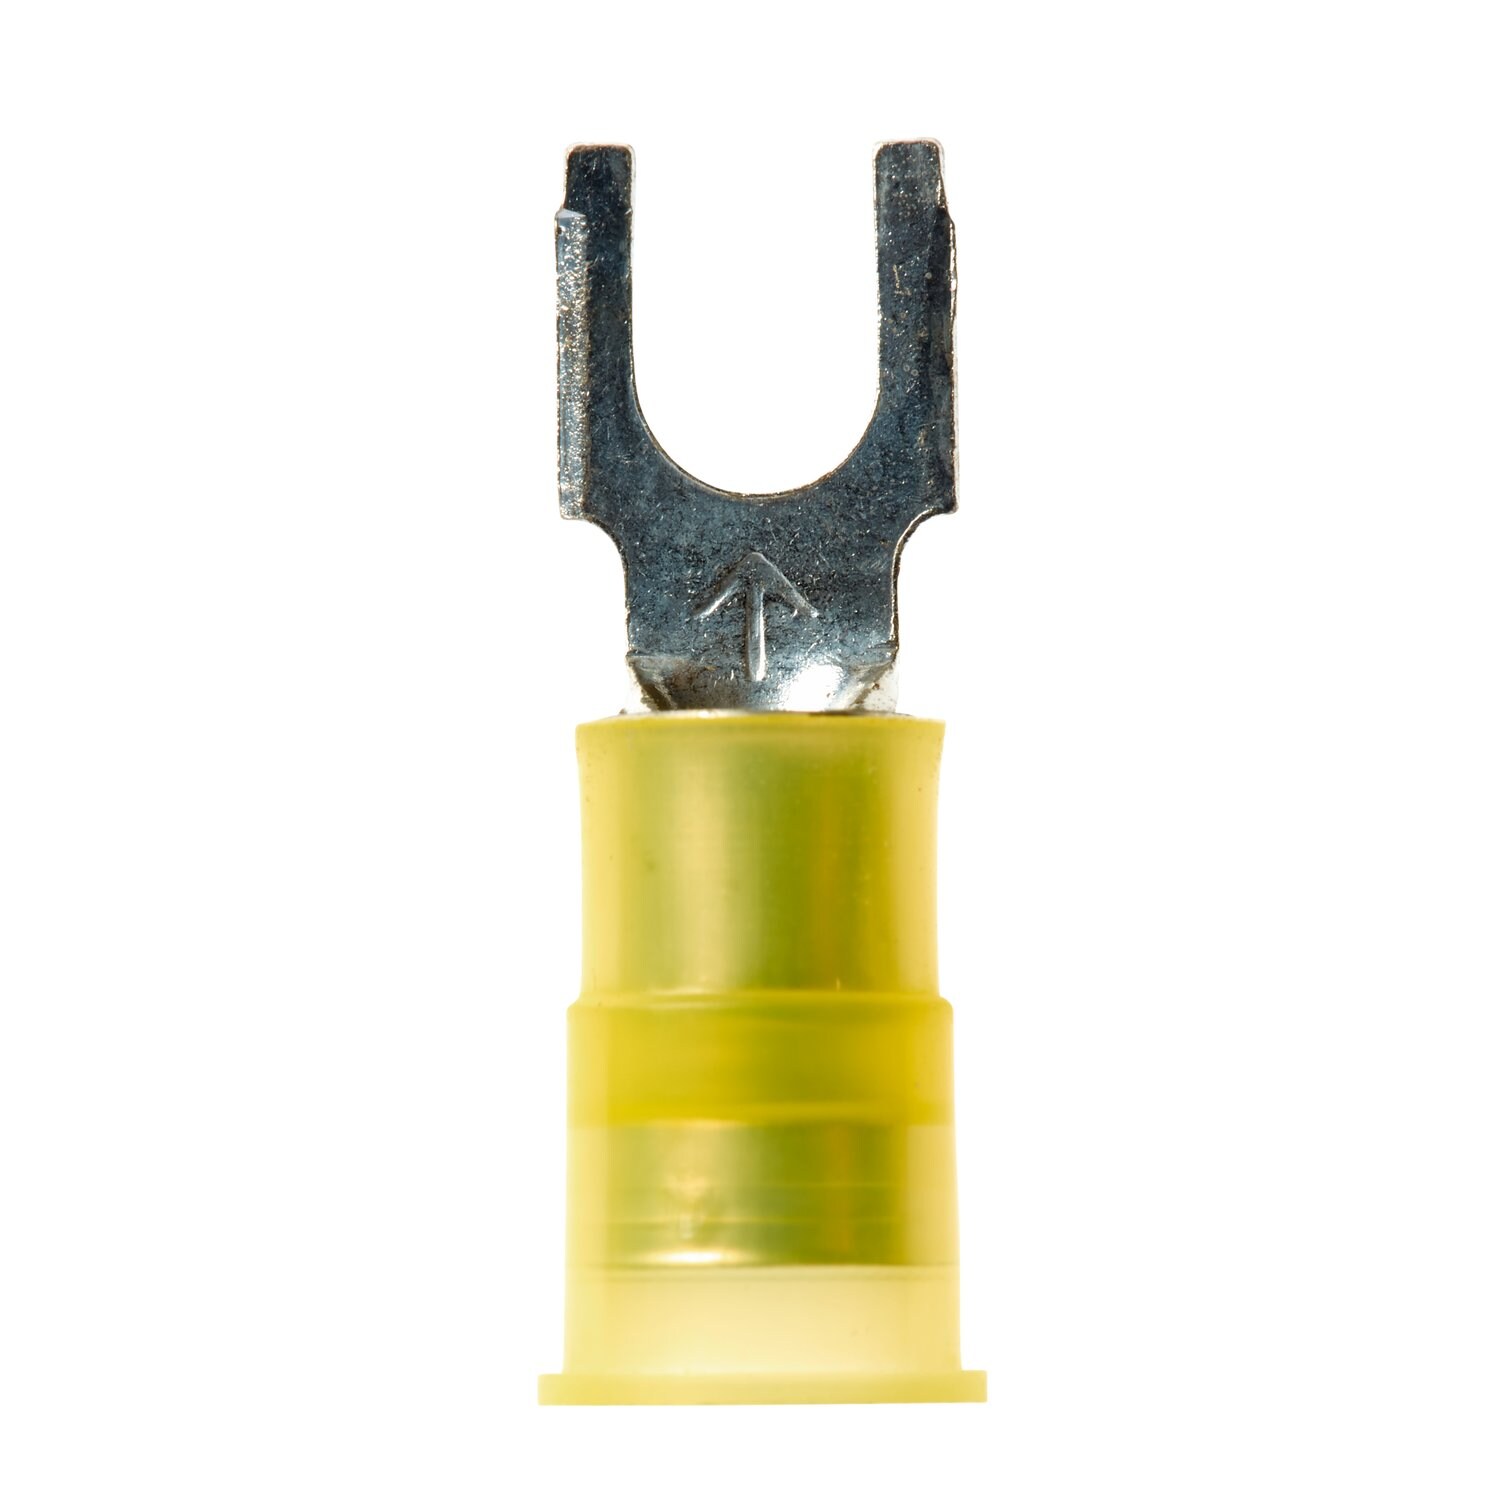 7000133309 - 3M Scotchlok Block Fork Nylon Insulated, 50/bottle, MNG10-10FBX,
suitable for use in a terminal block, 500/Case